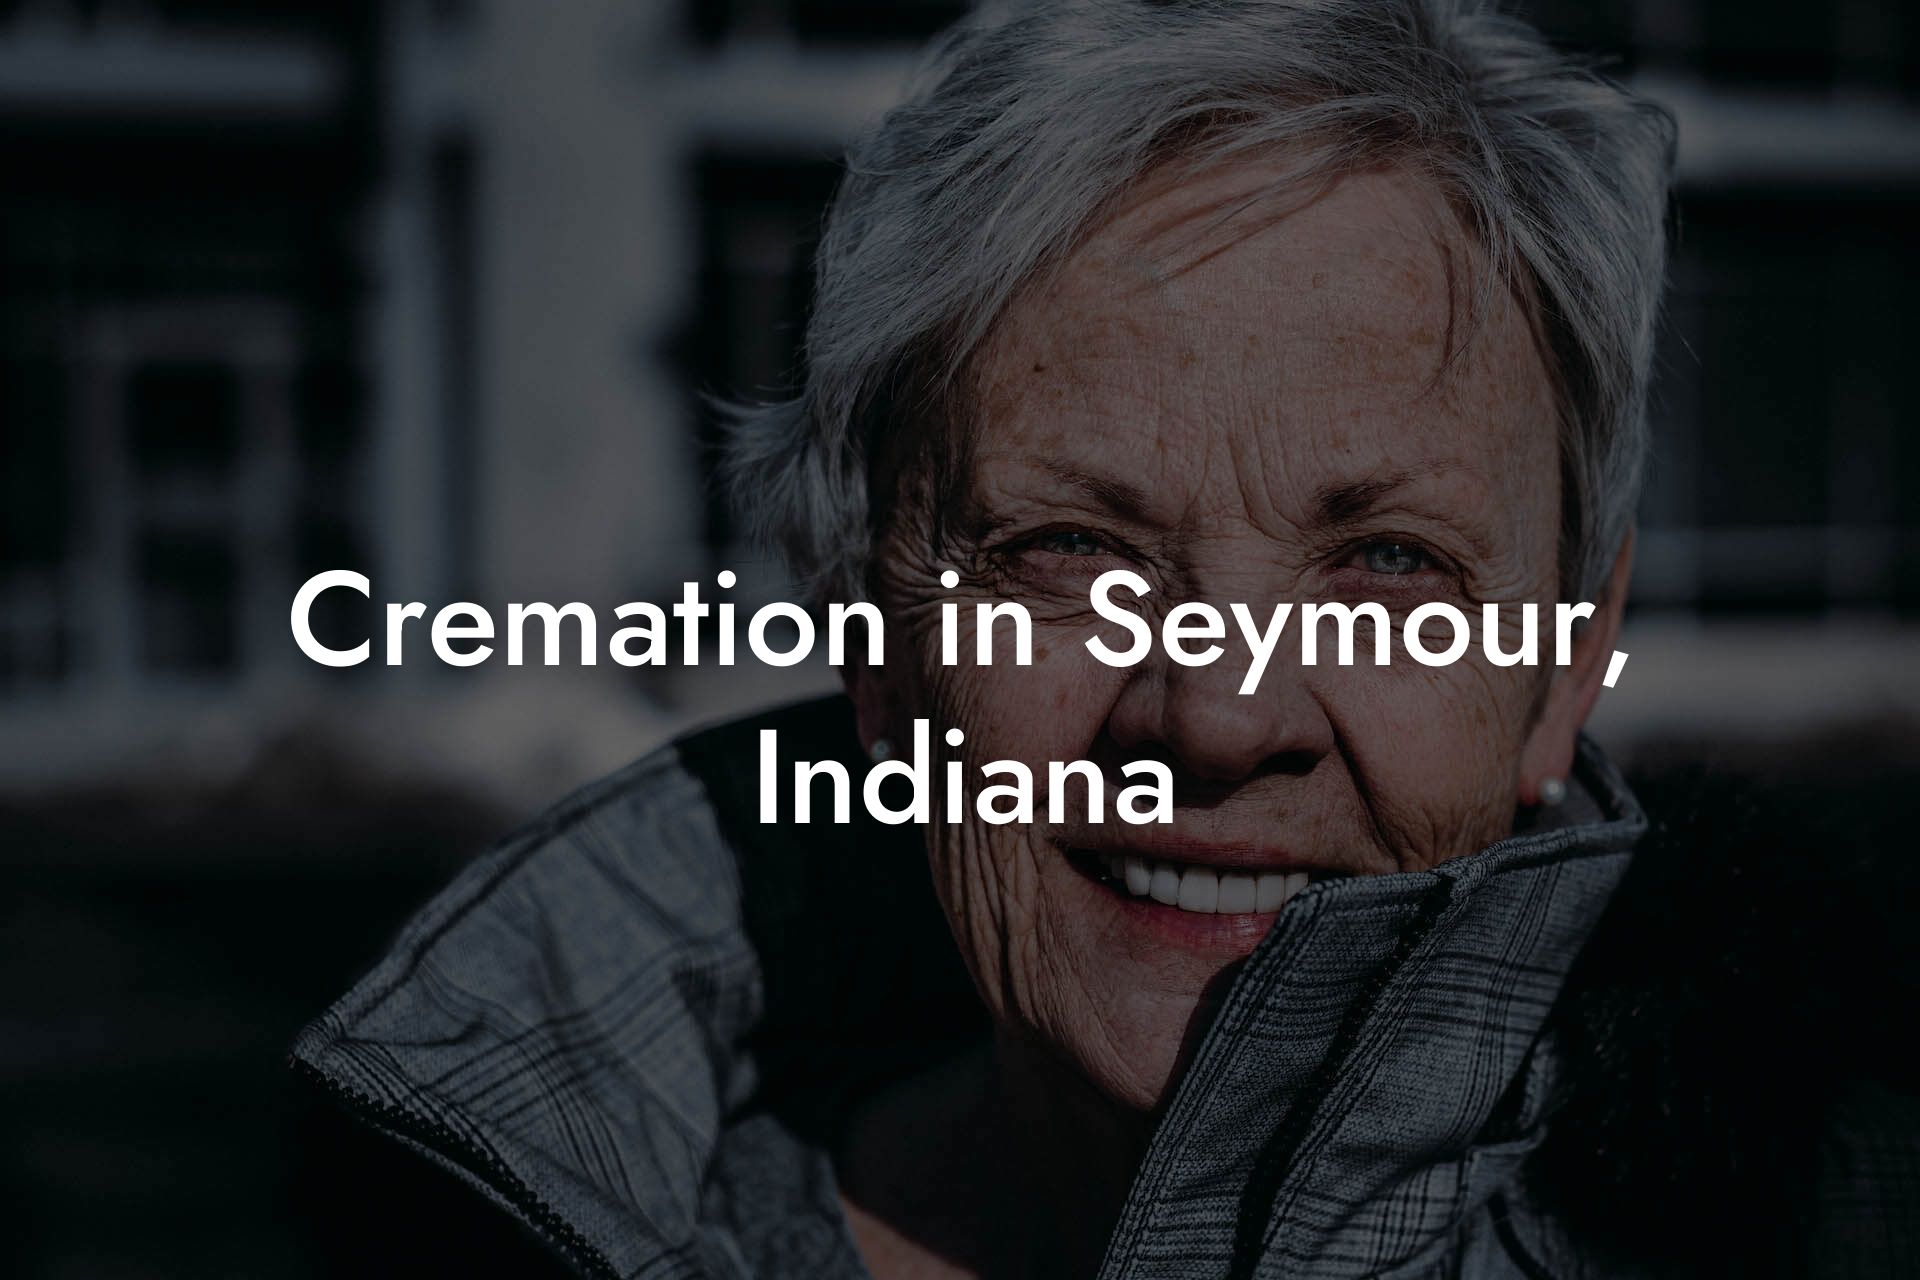 Cremation in Seymour, Indiana